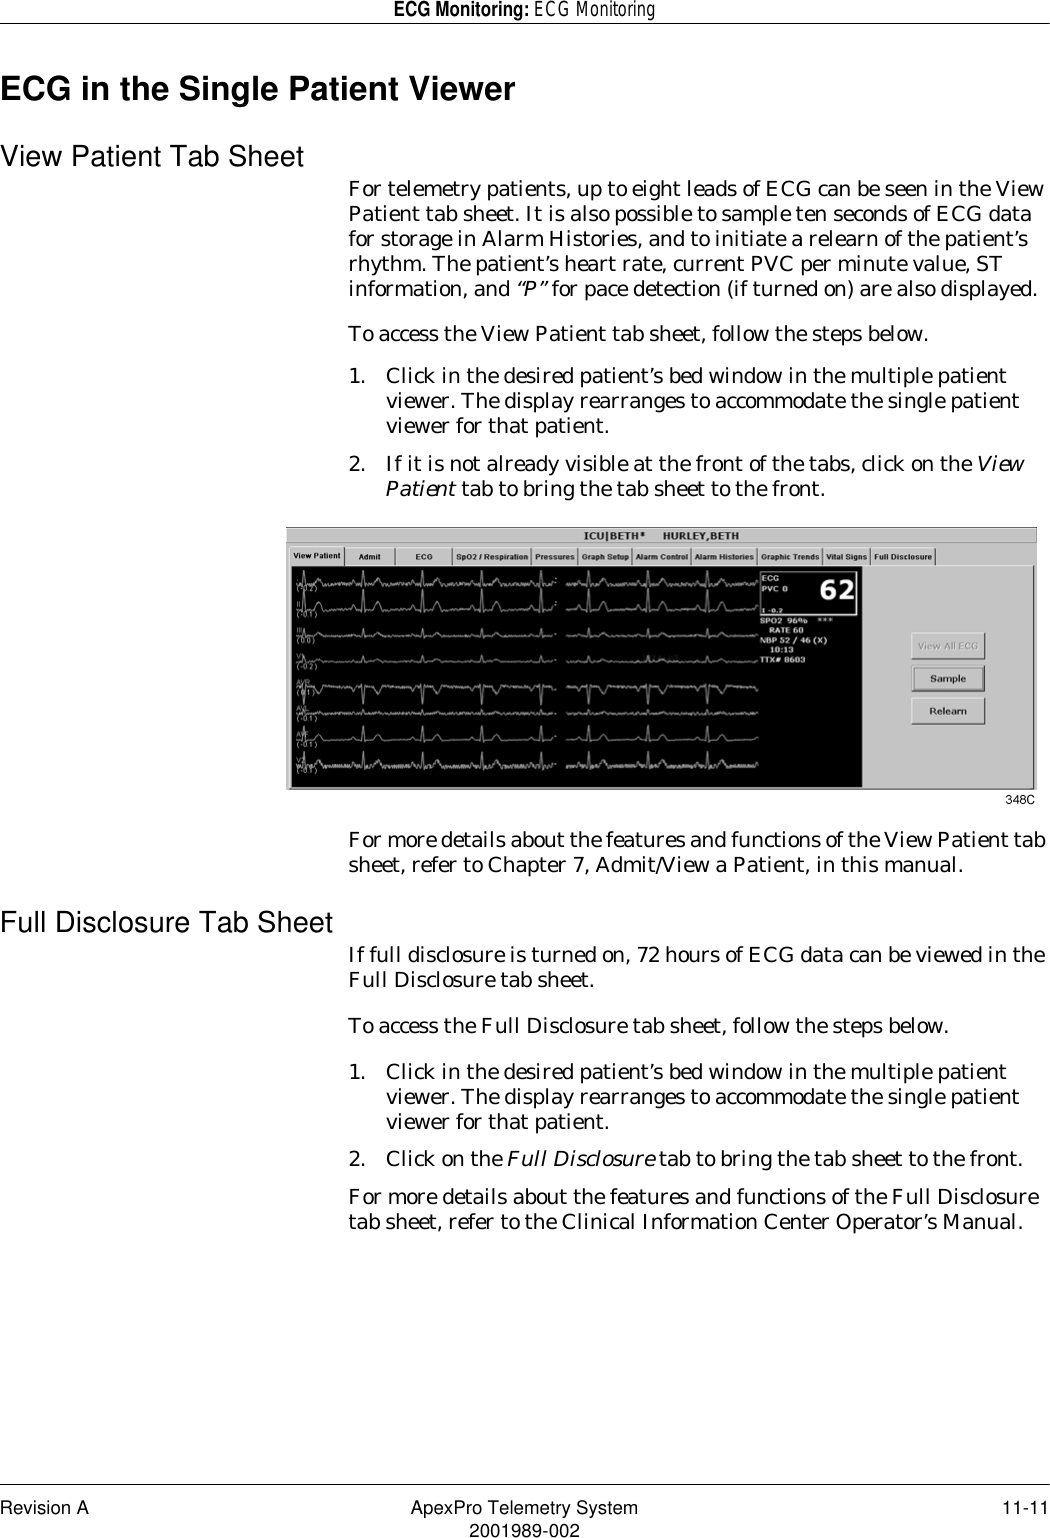 Revision A ApexPro Telemetry System 11-112001989-002ECG Monitoring: ECG MonitoringECG in the Single Patient ViewerView Patient Tab Sheet For telemetry patients, up to eight leads of ECG can be seen in the View Patient tab sheet. It is also possible to sample ten seconds of ECG data for storage in Alarm Histories, and to initiate a relearn of the patient’s rhythm. The patient’s heart rate, current PVC per minute value, ST information, and “P” for pace detection (if turned on) are also displayed.To access the View Patient tab sheet, follow the steps below.1. Click in the desired patient’s bed window in the multiple patient viewer. The display rearranges to accommodate the single patient viewer for that patient.2. If it is not already visible at the front of the tabs, click on the View Patient tab to bring the tab sheet to the front.For more details about the features and functions of the View Patient tab sheet, refer to Chapter 7, Admit/View a Patient, in this manual.Full Disclosure Tab Sheet If full disclosure is turned on, 72 hours of ECG data can be viewed in the Full Disclosure tab sheet.To access the Full Disclosure tab sheet, follow the steps below.1. Click in the desired patient’s bed window in the multiple patient viewer. The display rearranges to accommodate the single patient viewer for that patient.2. Click on the Full Disclosure tab to bring the tab sheet to the front.For more details about the features and functions of the Full Disclosure tab sheet, refer to the Clinical Information Center Operator’s Manual.